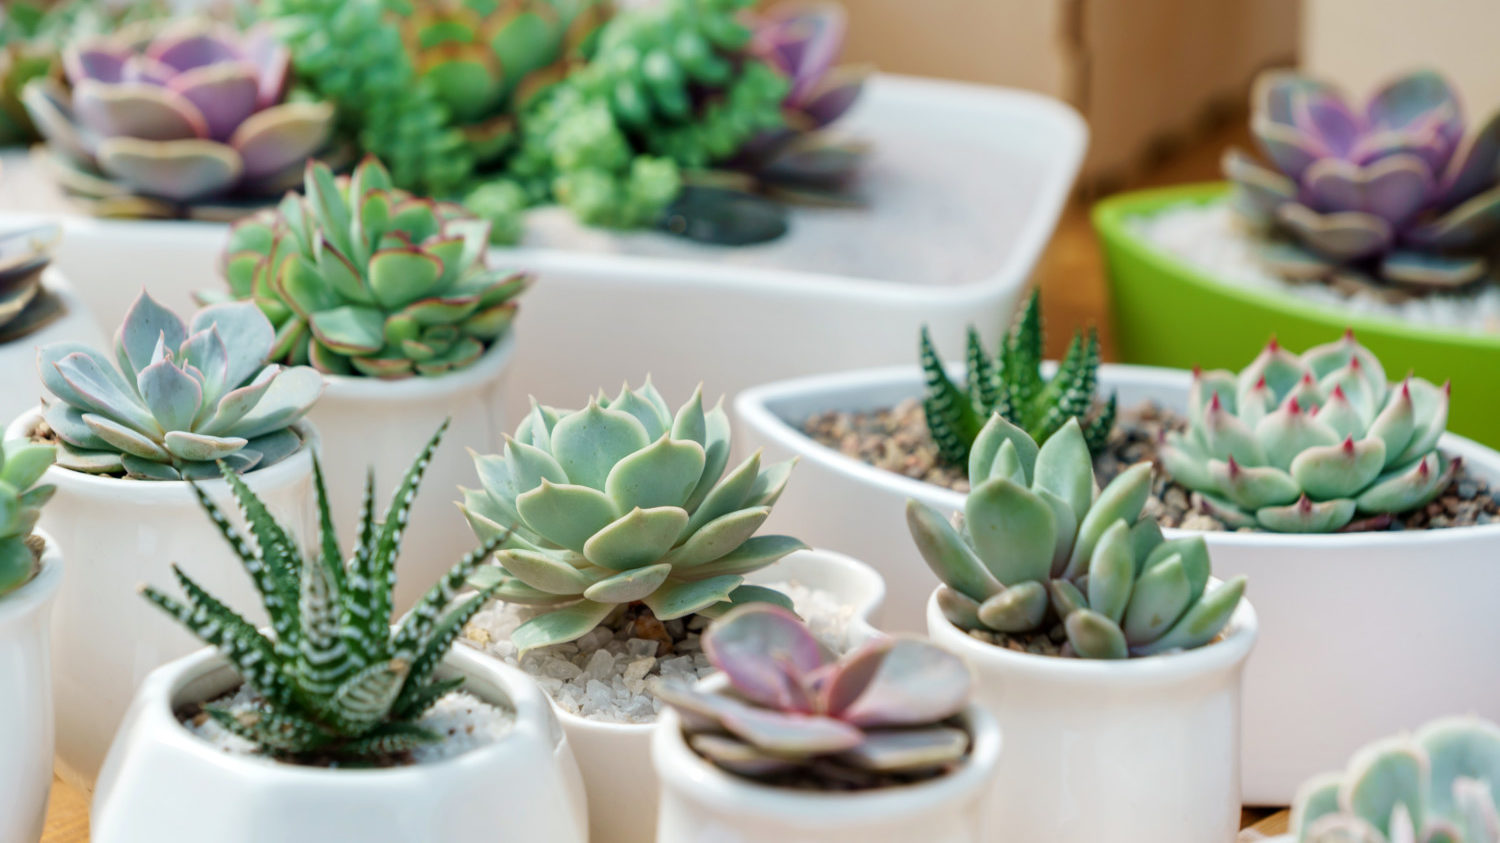 Many small succulents in white pots